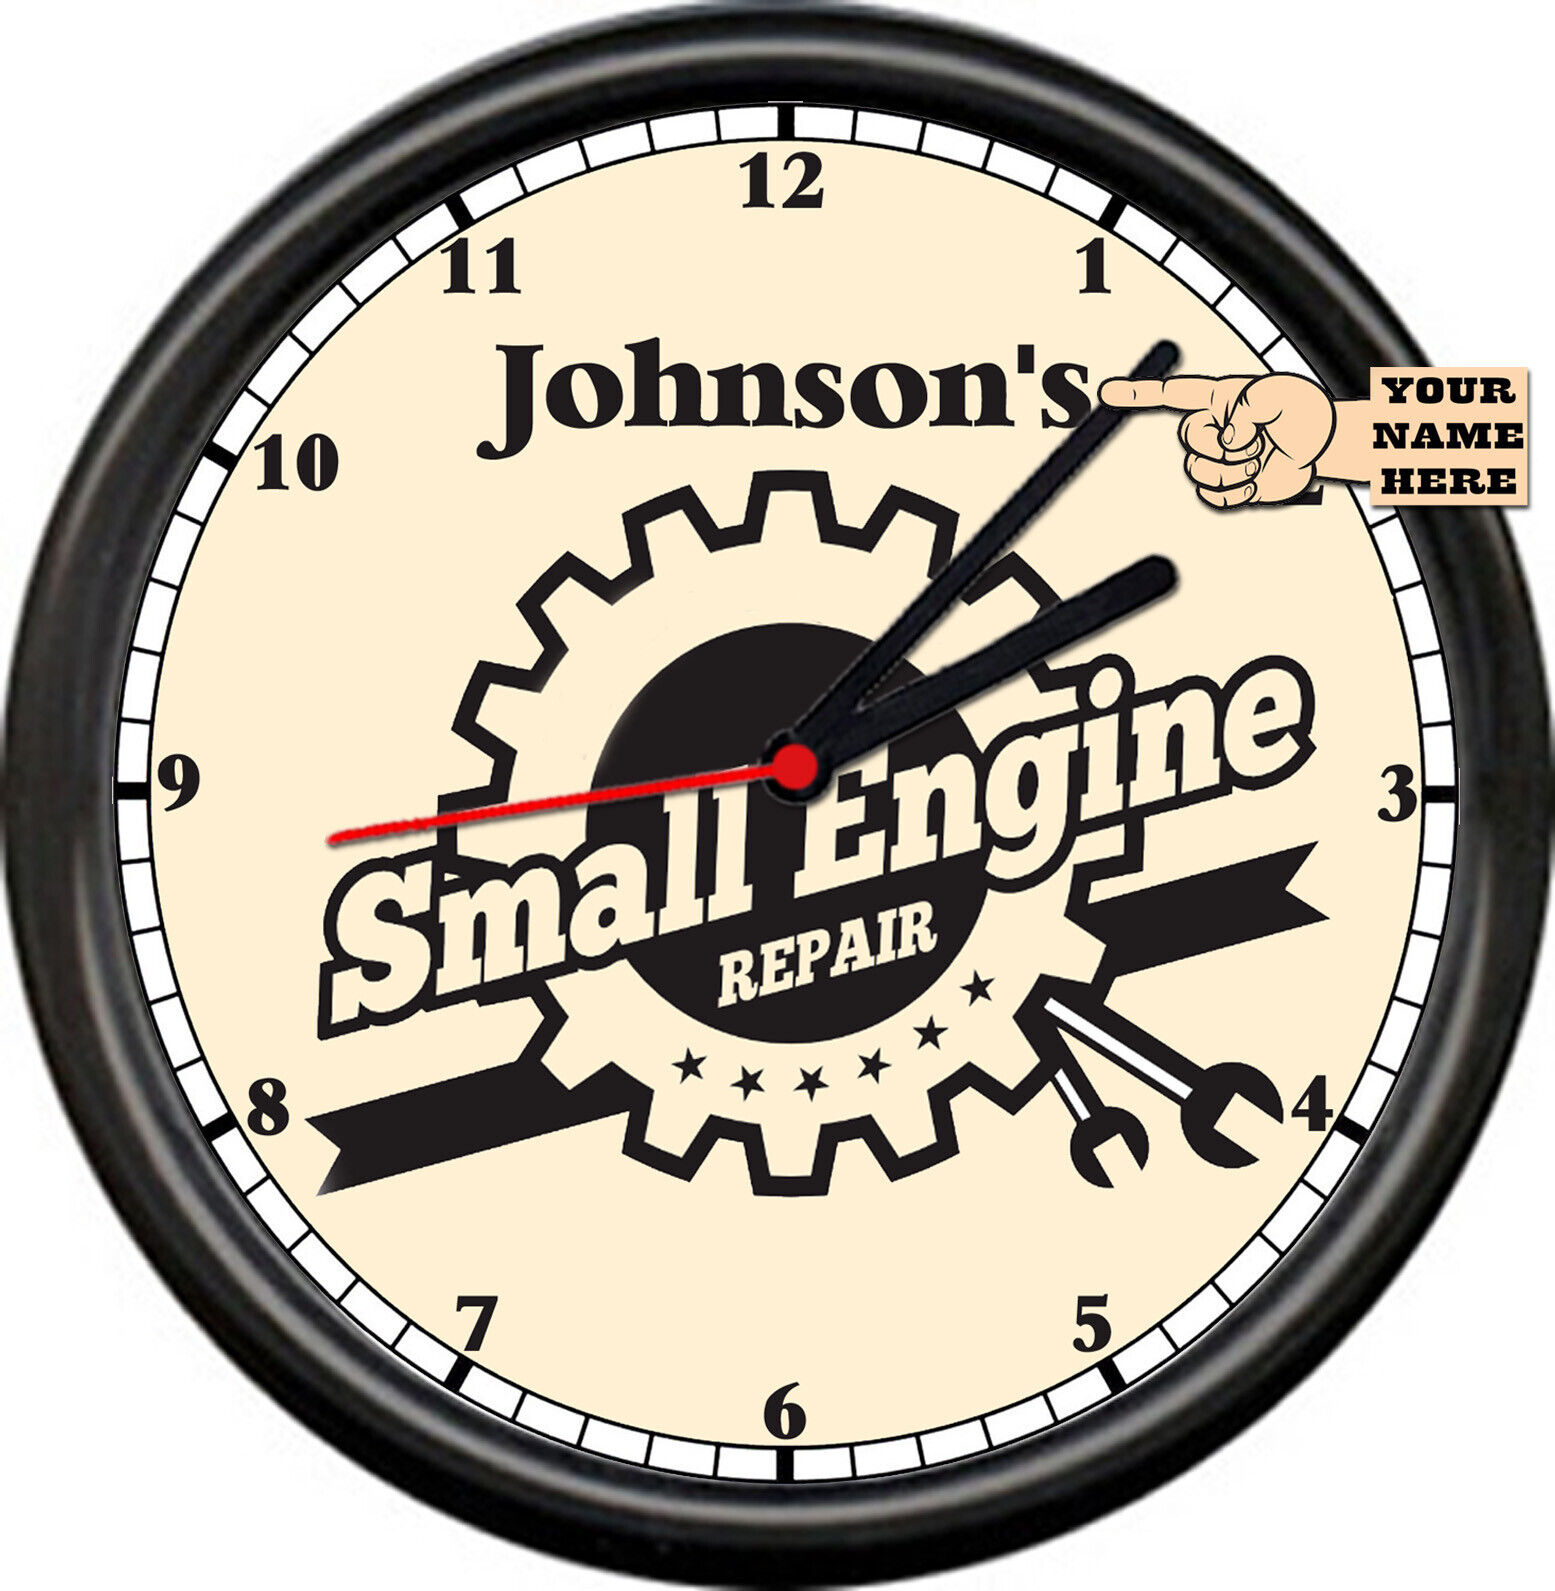 Personalized Small Engine Repair Garage Auto Tool Mechanic Service Wall Clock